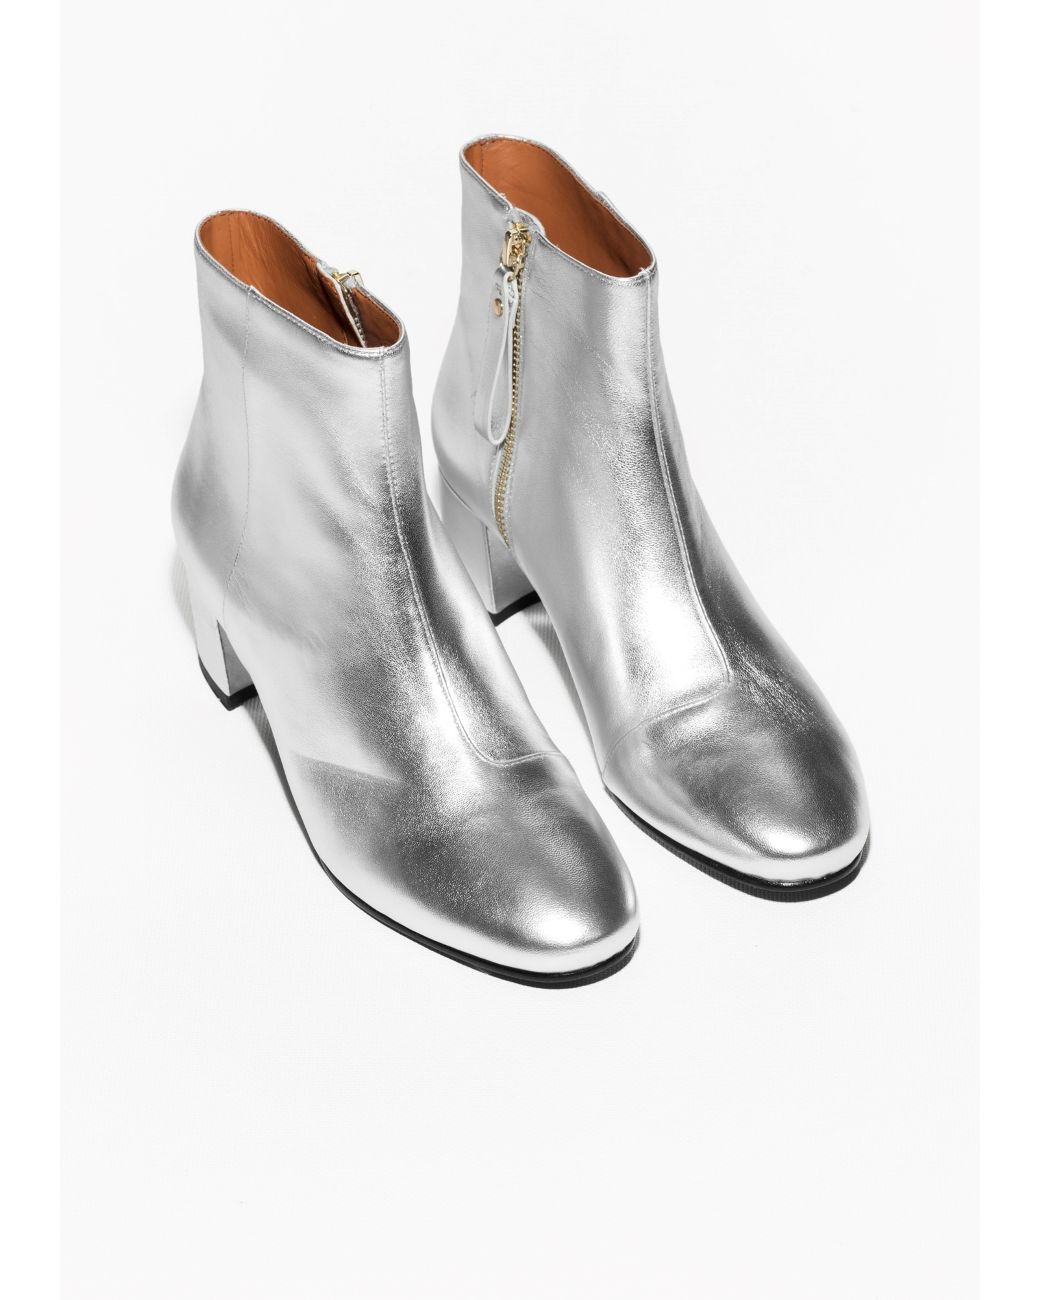 & Other Stories Silver Ankle Boots in Metallic | Lyst UK